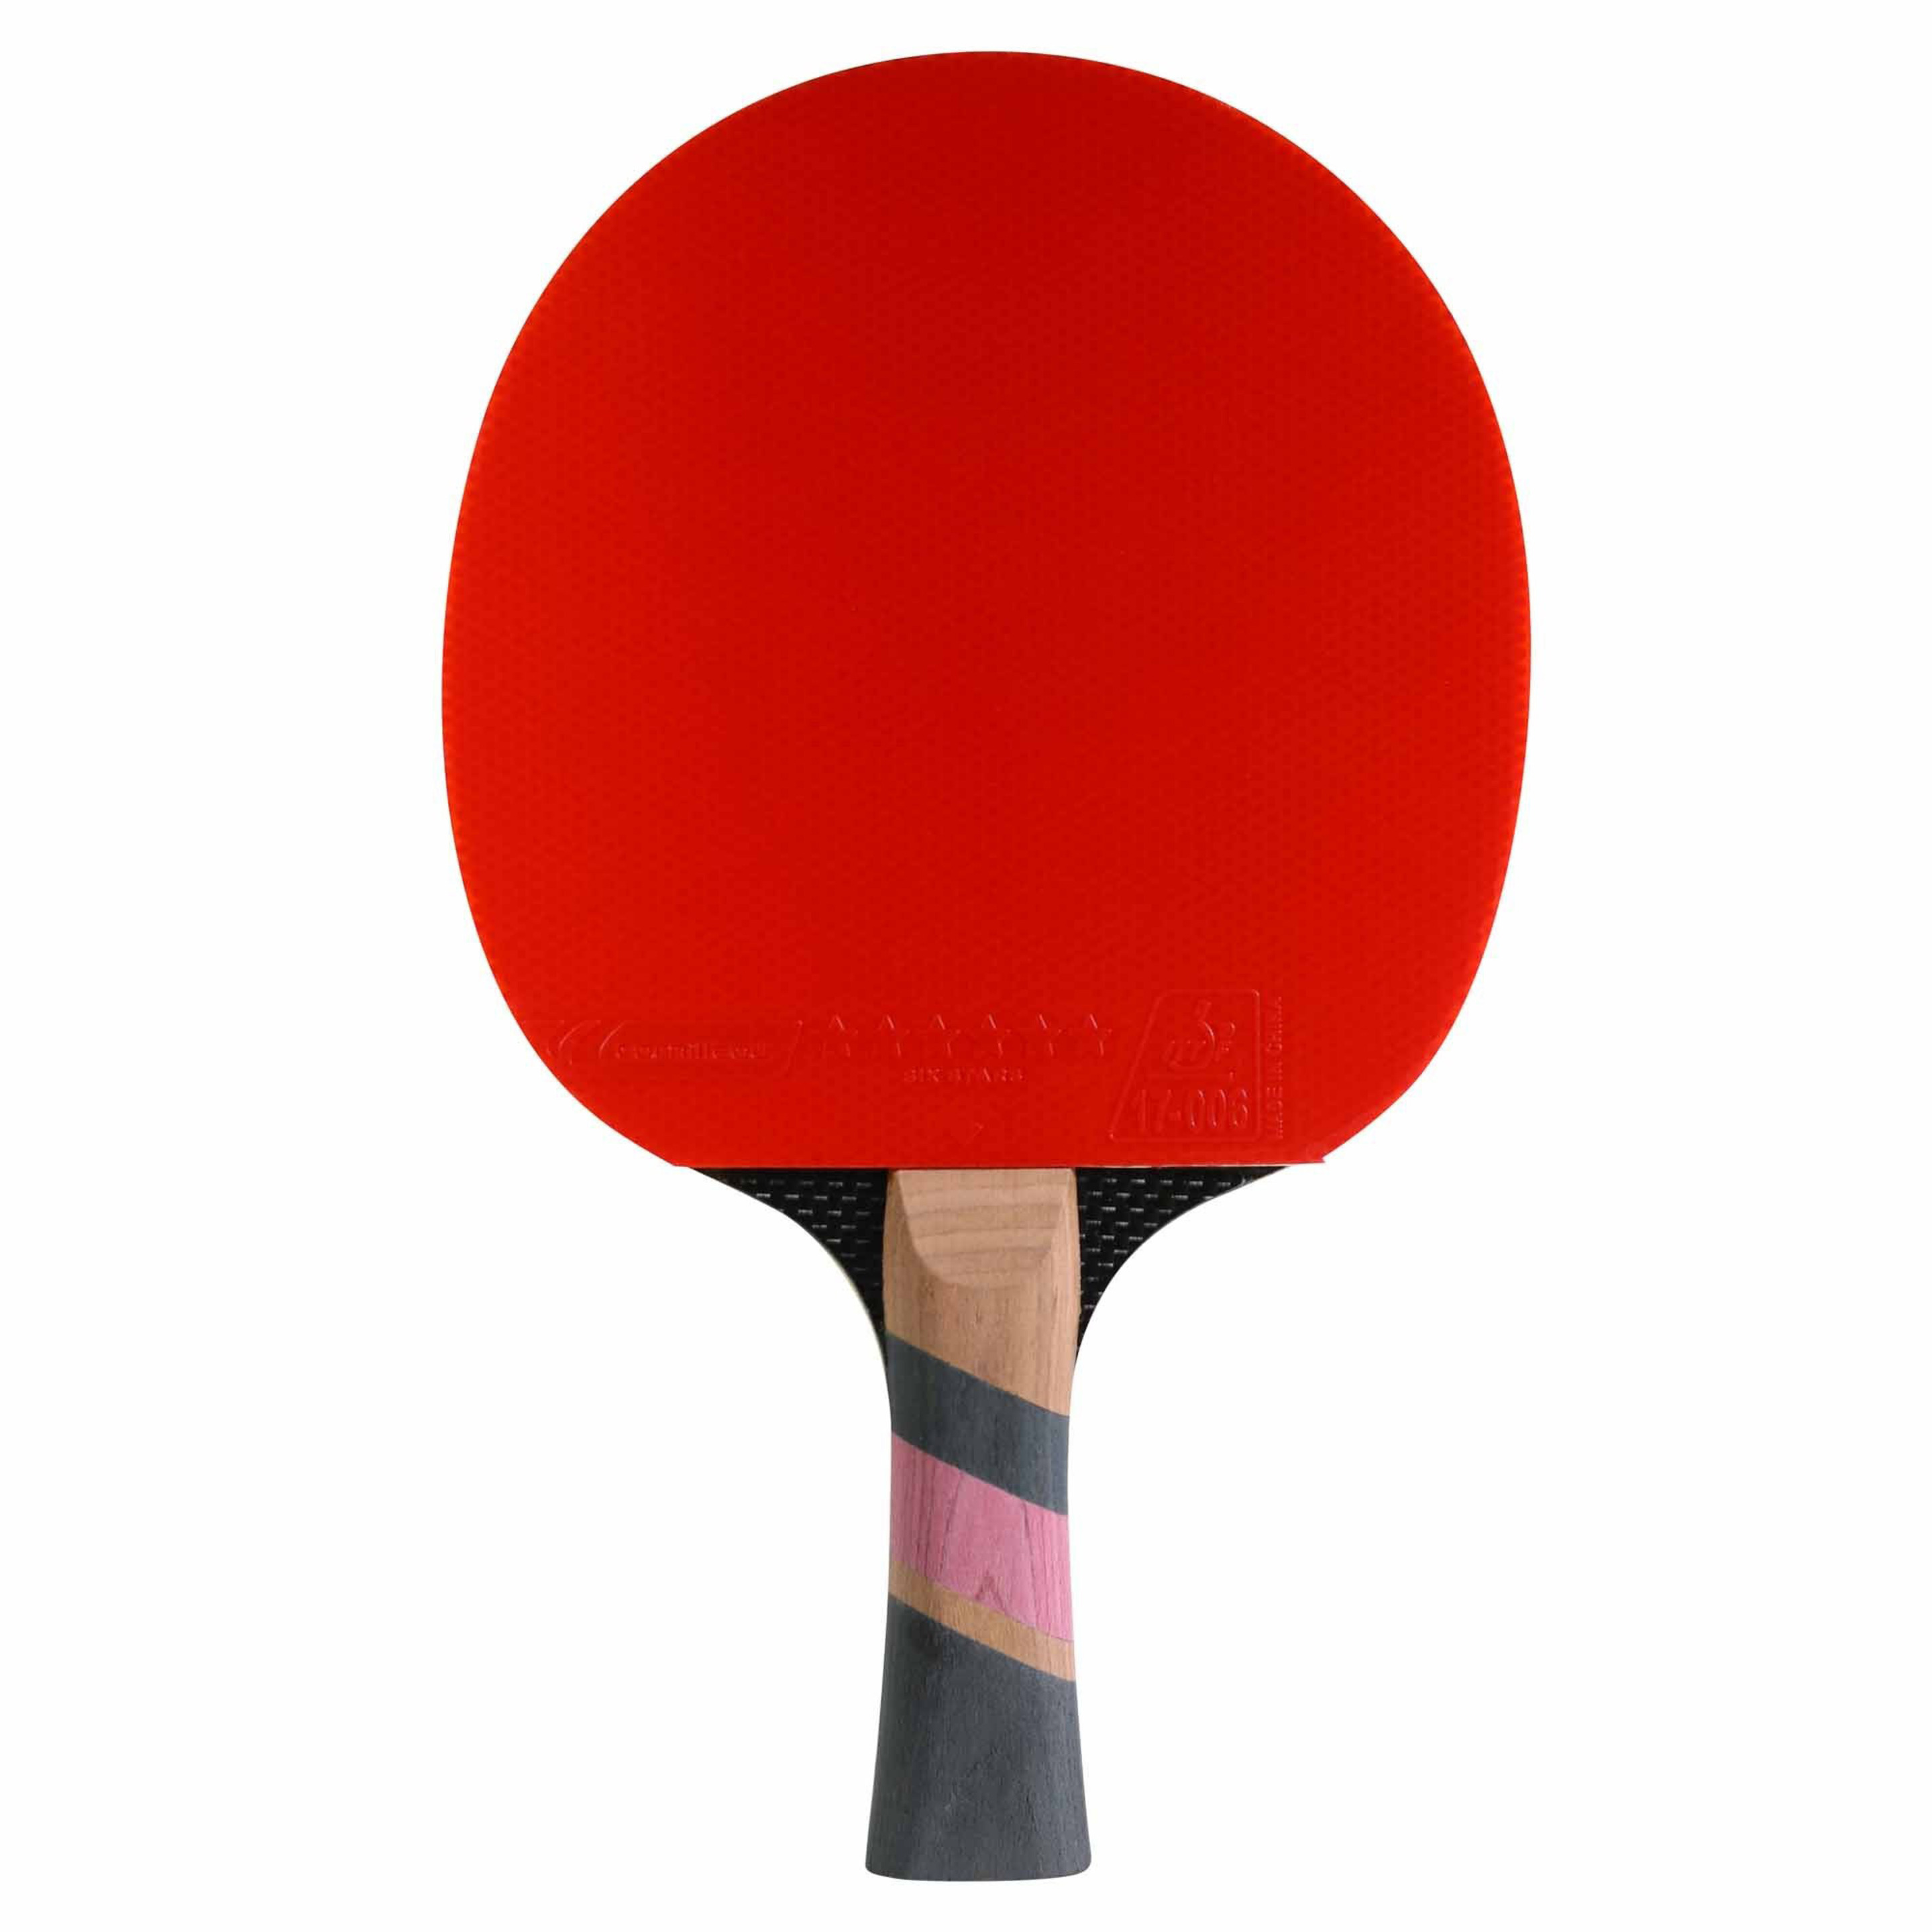 Pala Ping Pong Cornilleau Sport 3000 Excell Carbon 413000